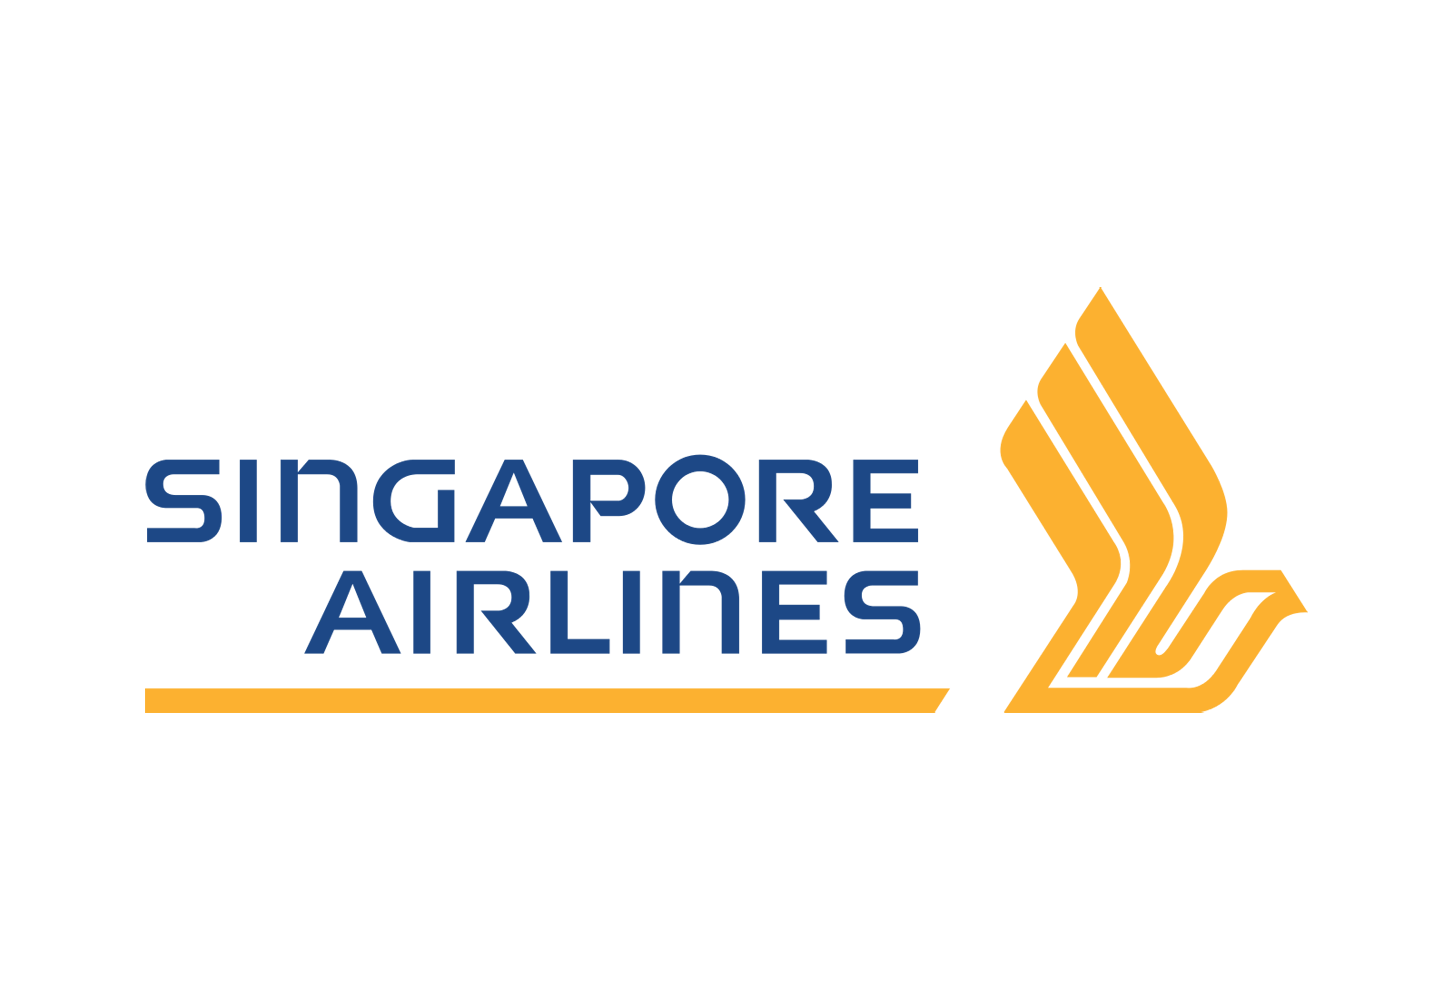 Singapore Airlines Logo Vecto